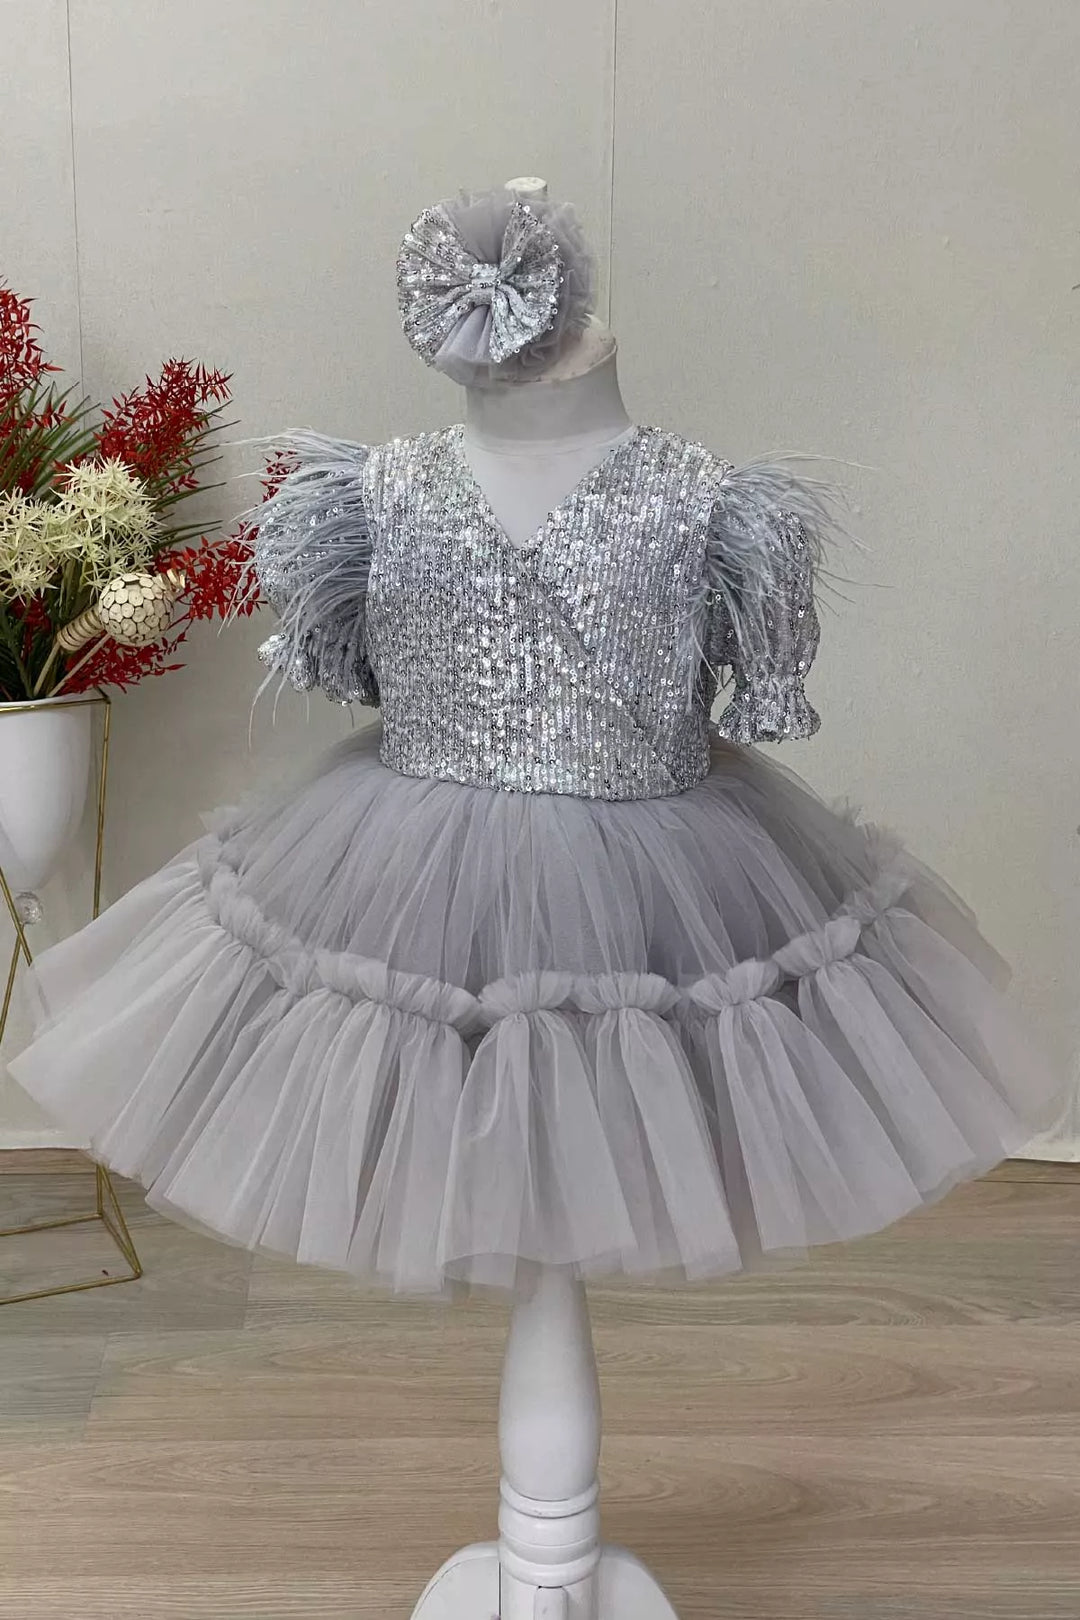 A gray girl dress that has sequins, half sleeve, feathers, V-neck, and puffy skirt